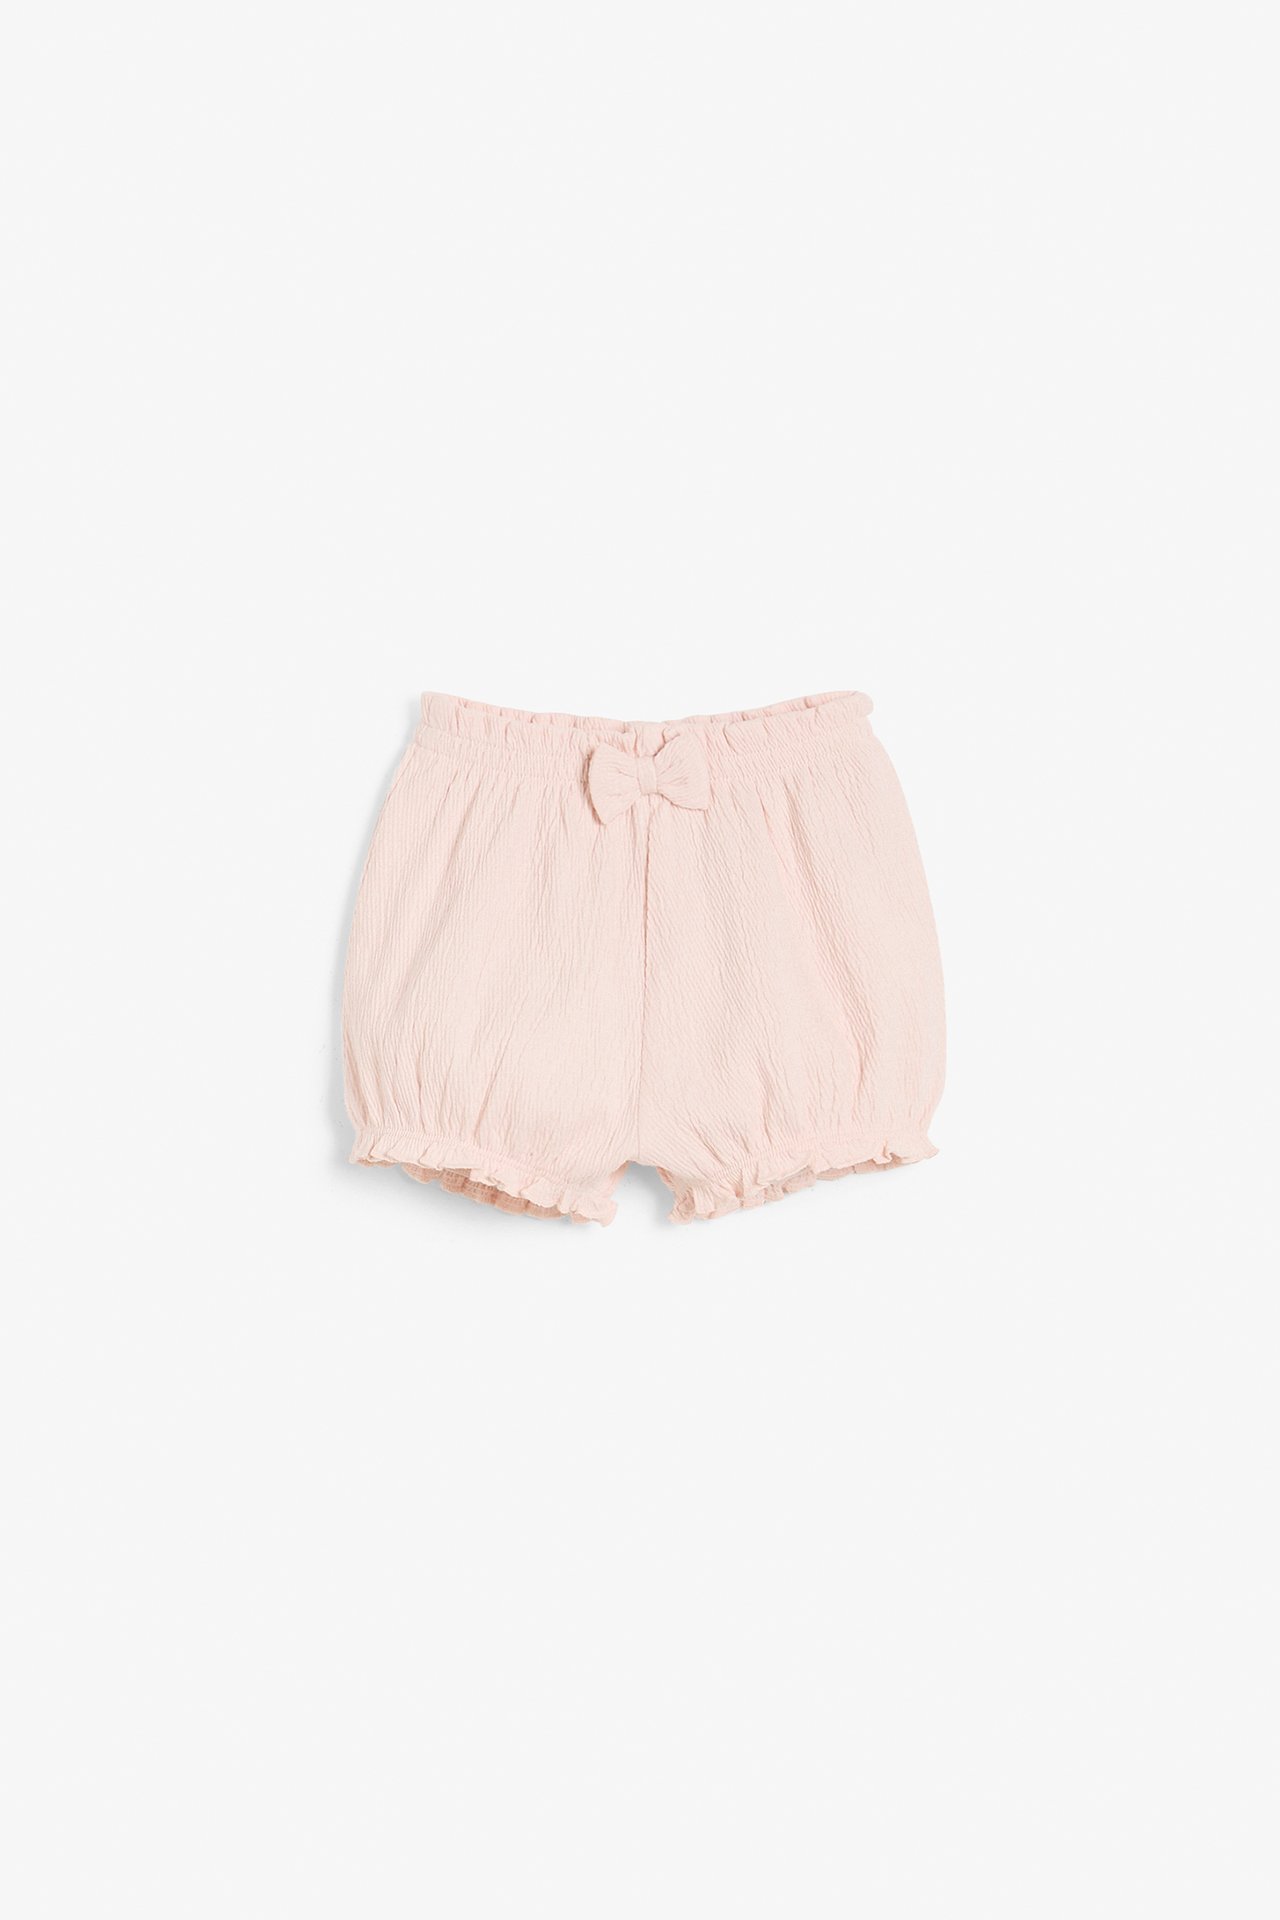 Puffshorts baby - Rosa - 5